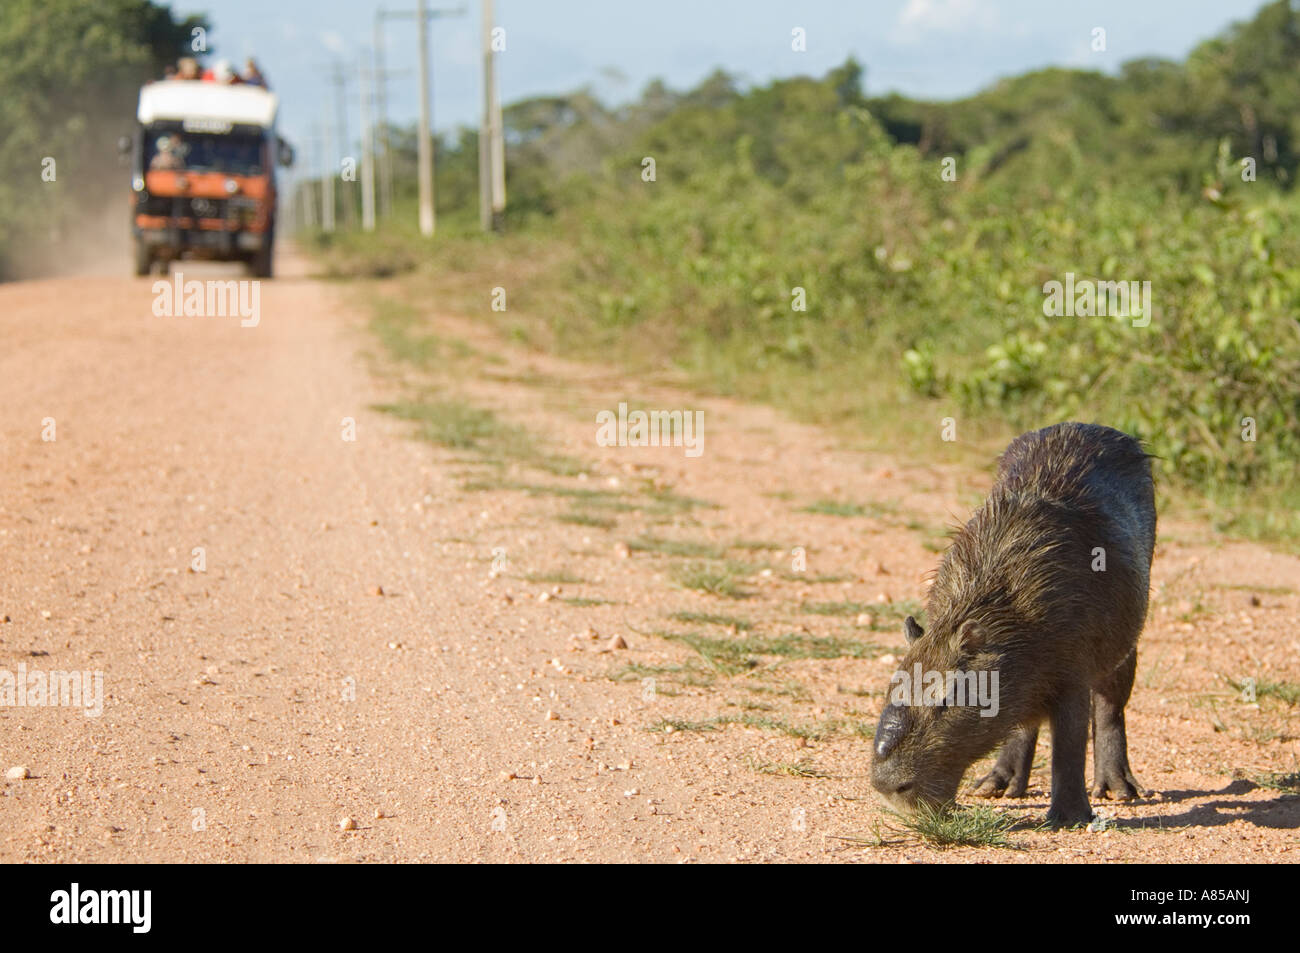 The Capybara (Hydrochaeris hydrochaeris) is the world's largest rodent.  They can often be seen on the roads in the Pantanal. Stock Photo